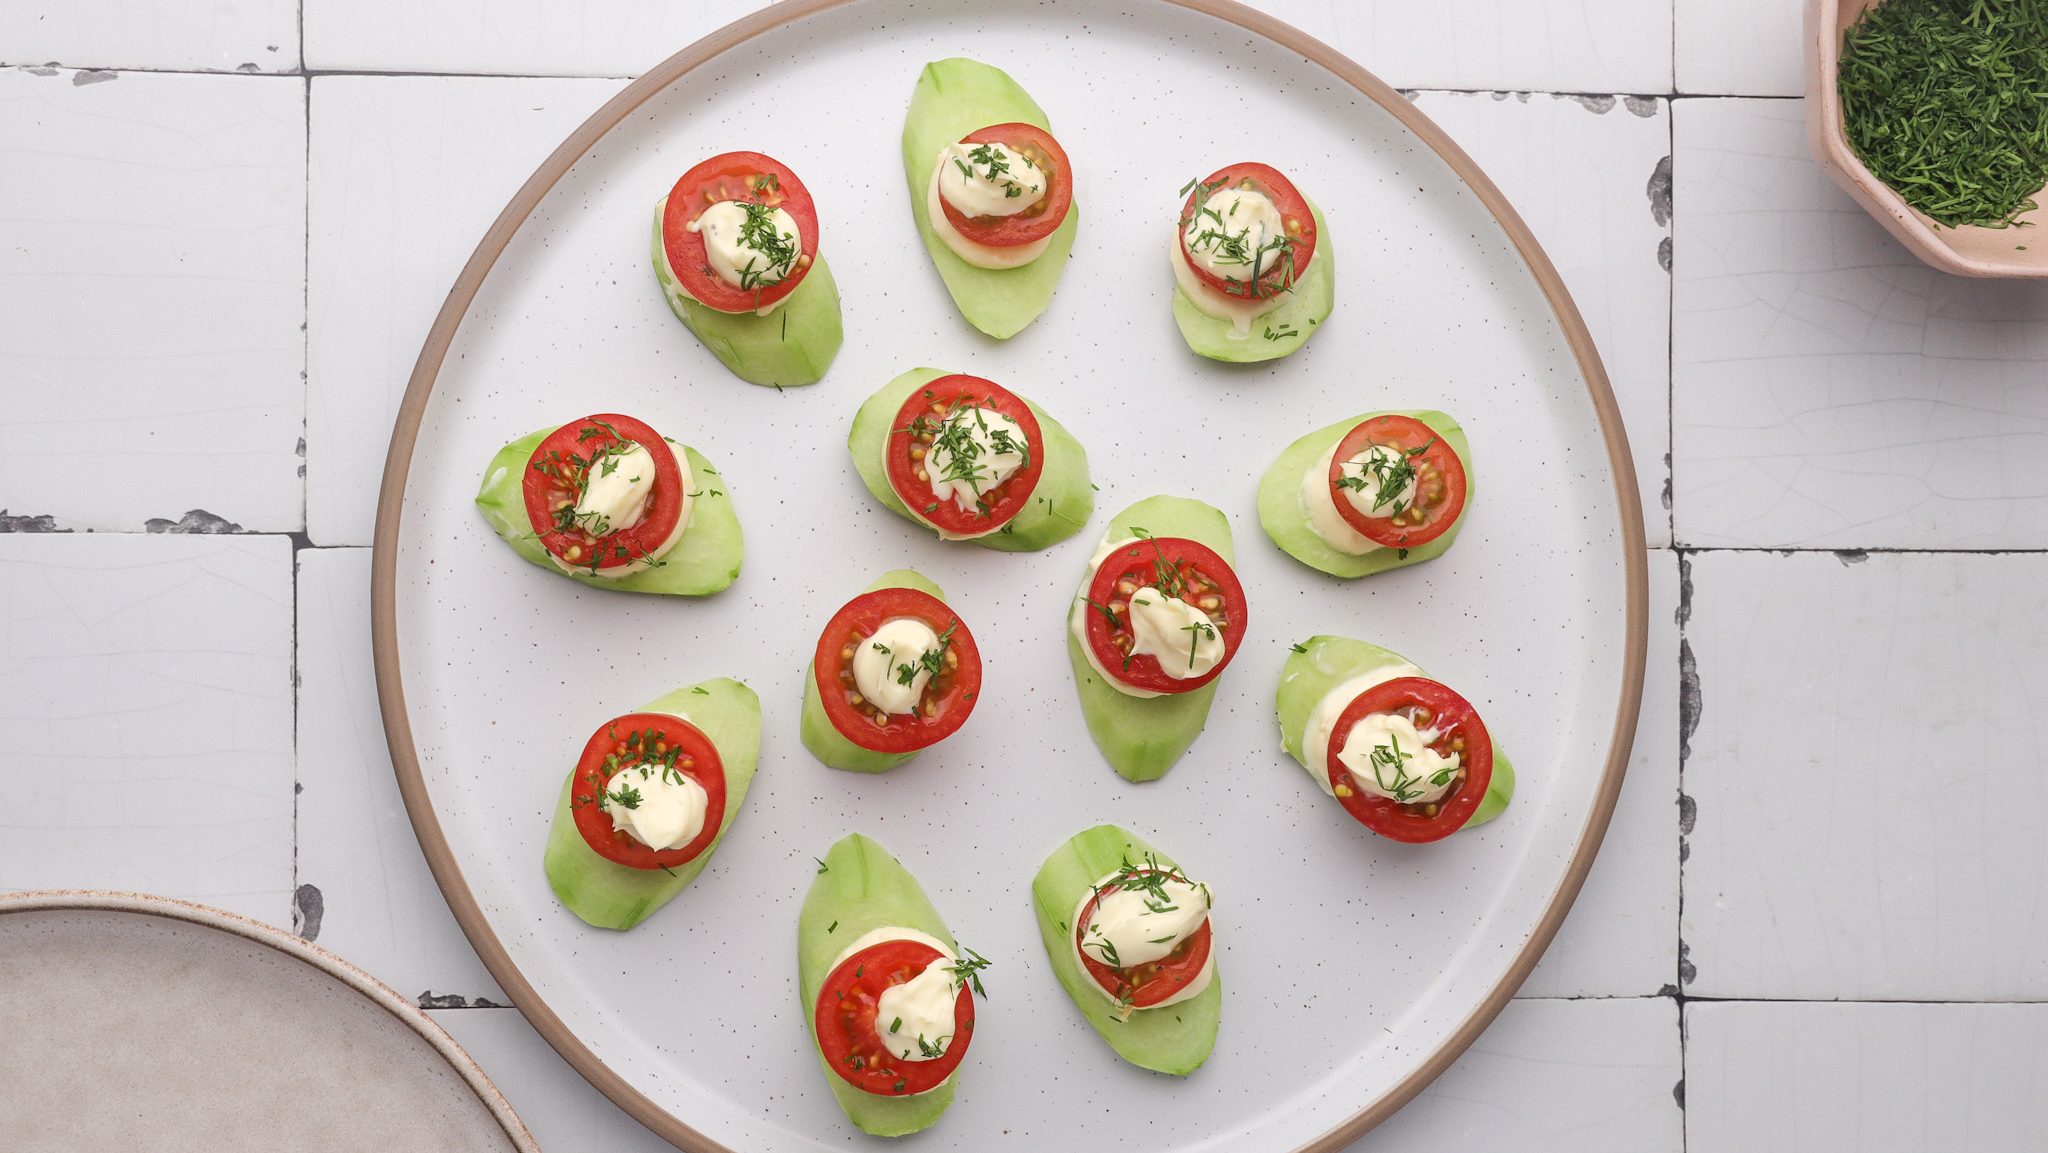 A topdown veiw of a white plate with cucumber, tomato and white cream canapes on it.